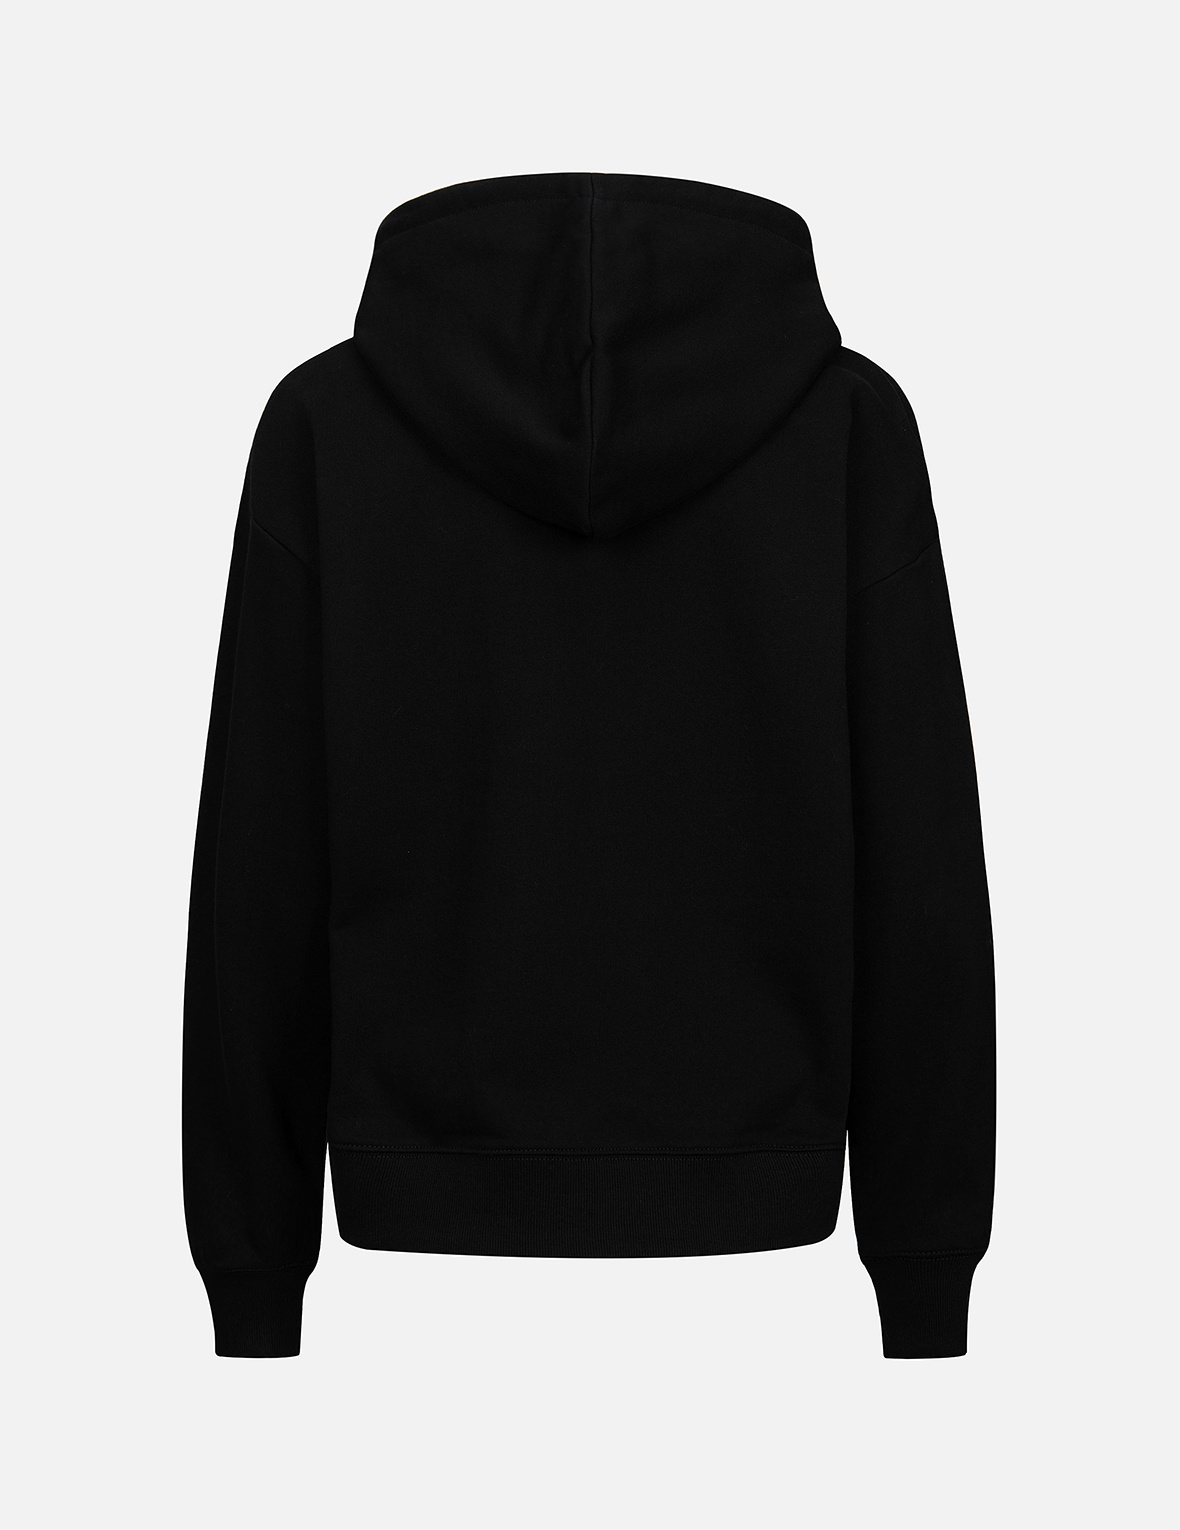 KAMON AND FLORAL-PATTERN LOGO APPLIQUÉ CROPPED HOODIE - 2